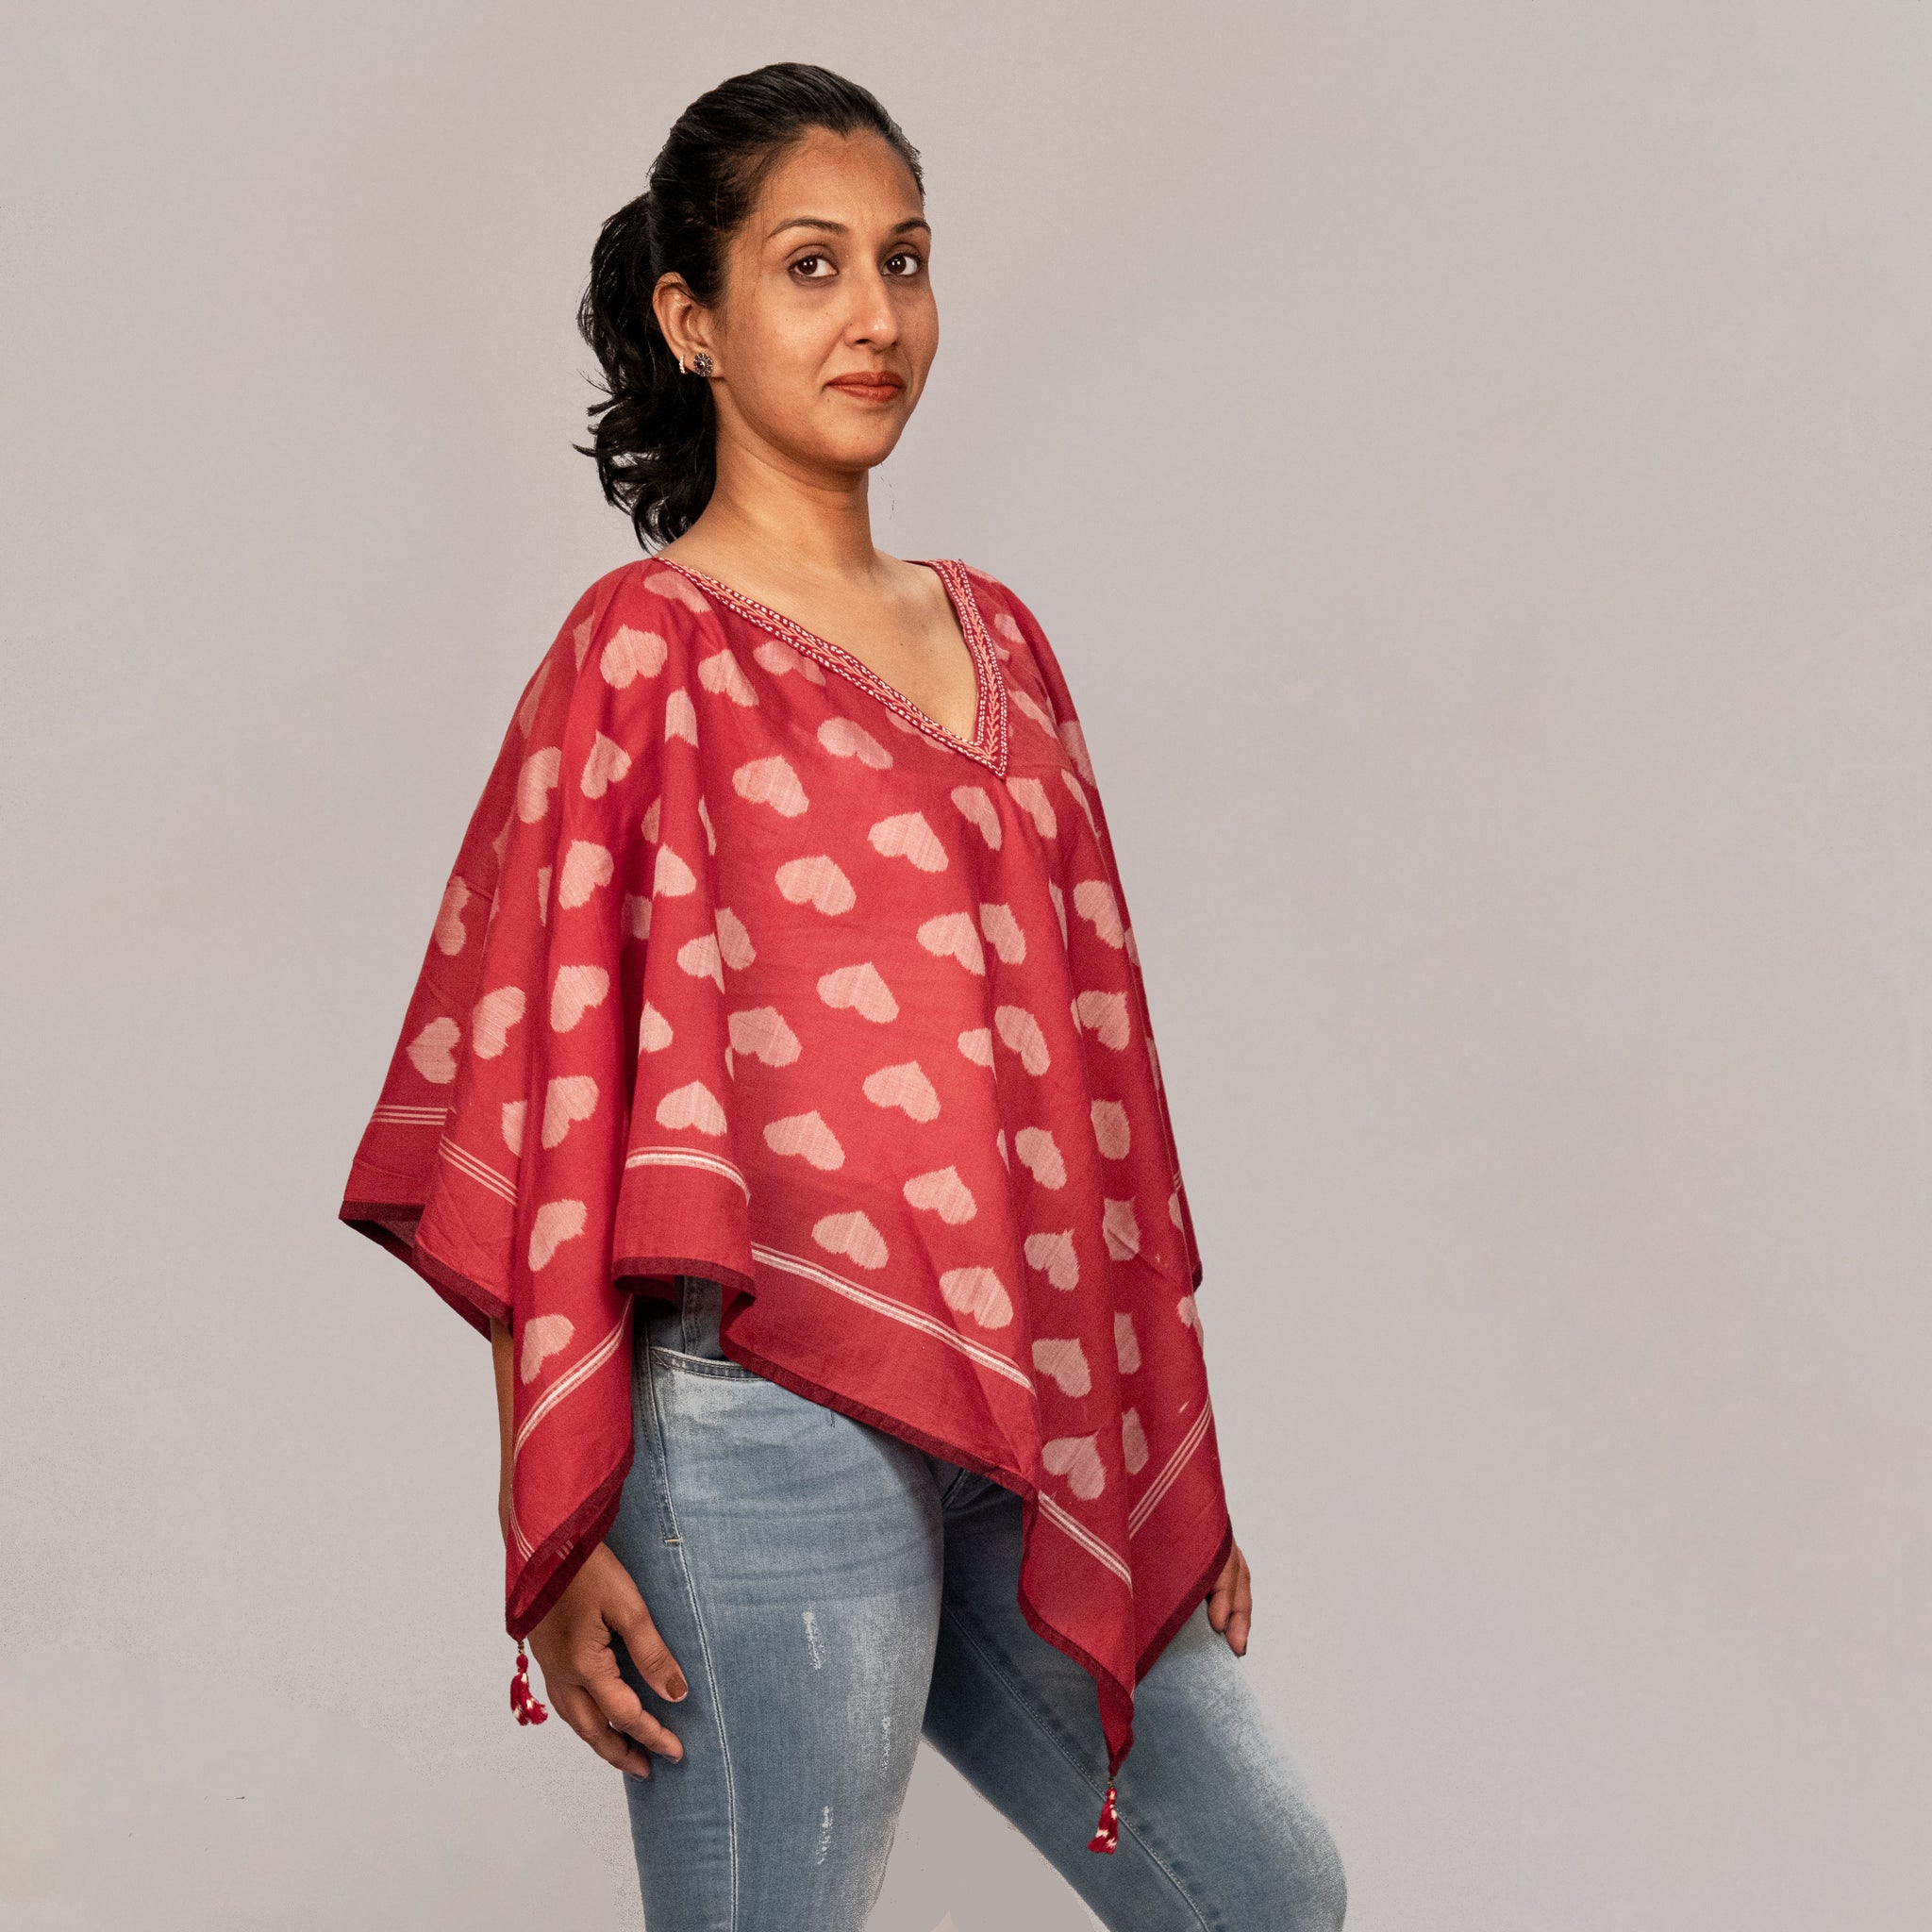 Sambalpuri triangle maroon ikat poncho with allover taash hearts and hand embroidery detailing on neck